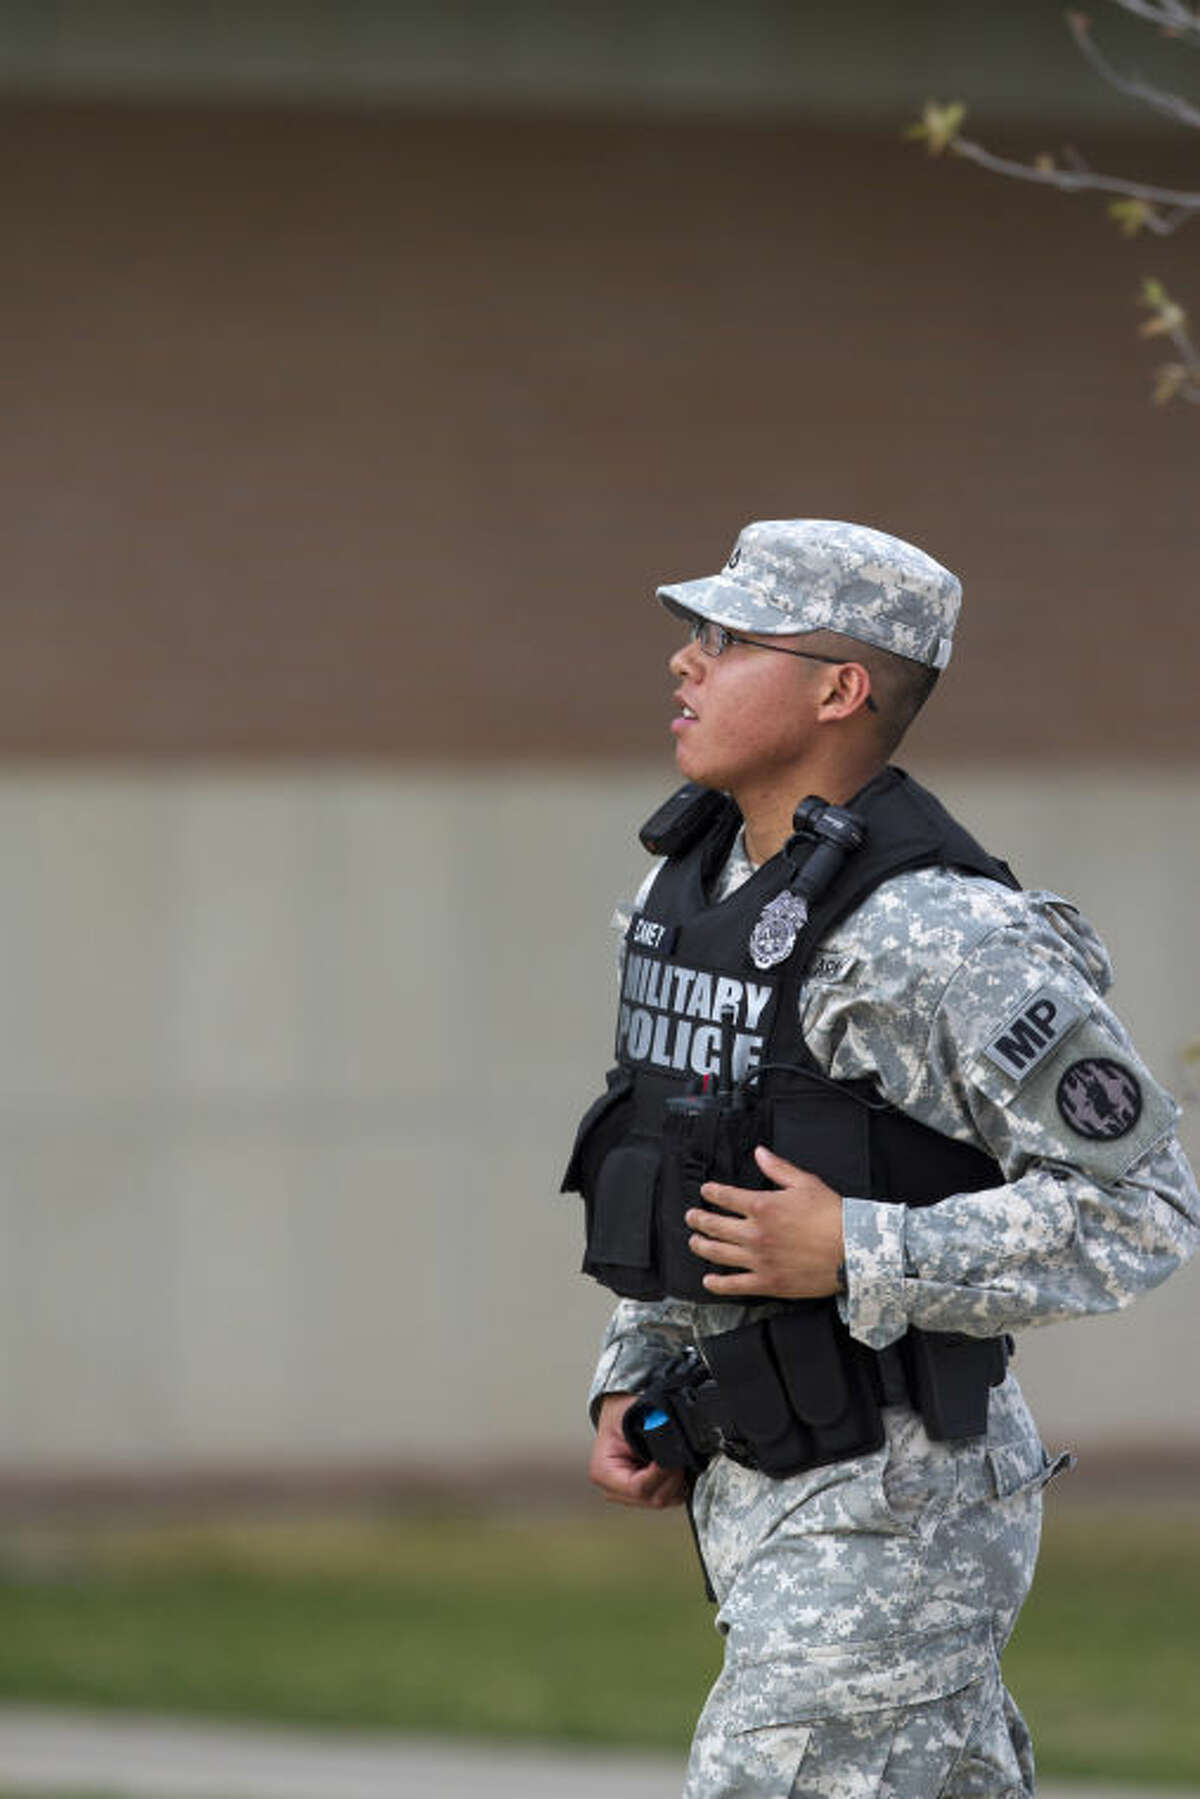 A Military Police officer runs toward the road leading to the Main Gate, Wednesday, April 2, 2014, as an active shooter remains at large at Fort Hood, Texas. One person was killed and 14 injured in the shooting, and officials at the base said the shooter is believed to be dead. The details about the number of people hurt came from two U.S. officials who spoke on condition of anonymity because they were not authorized to discuss the information by name. (AP Photo/The Temple Daily Telegram, Rusty Schramm)